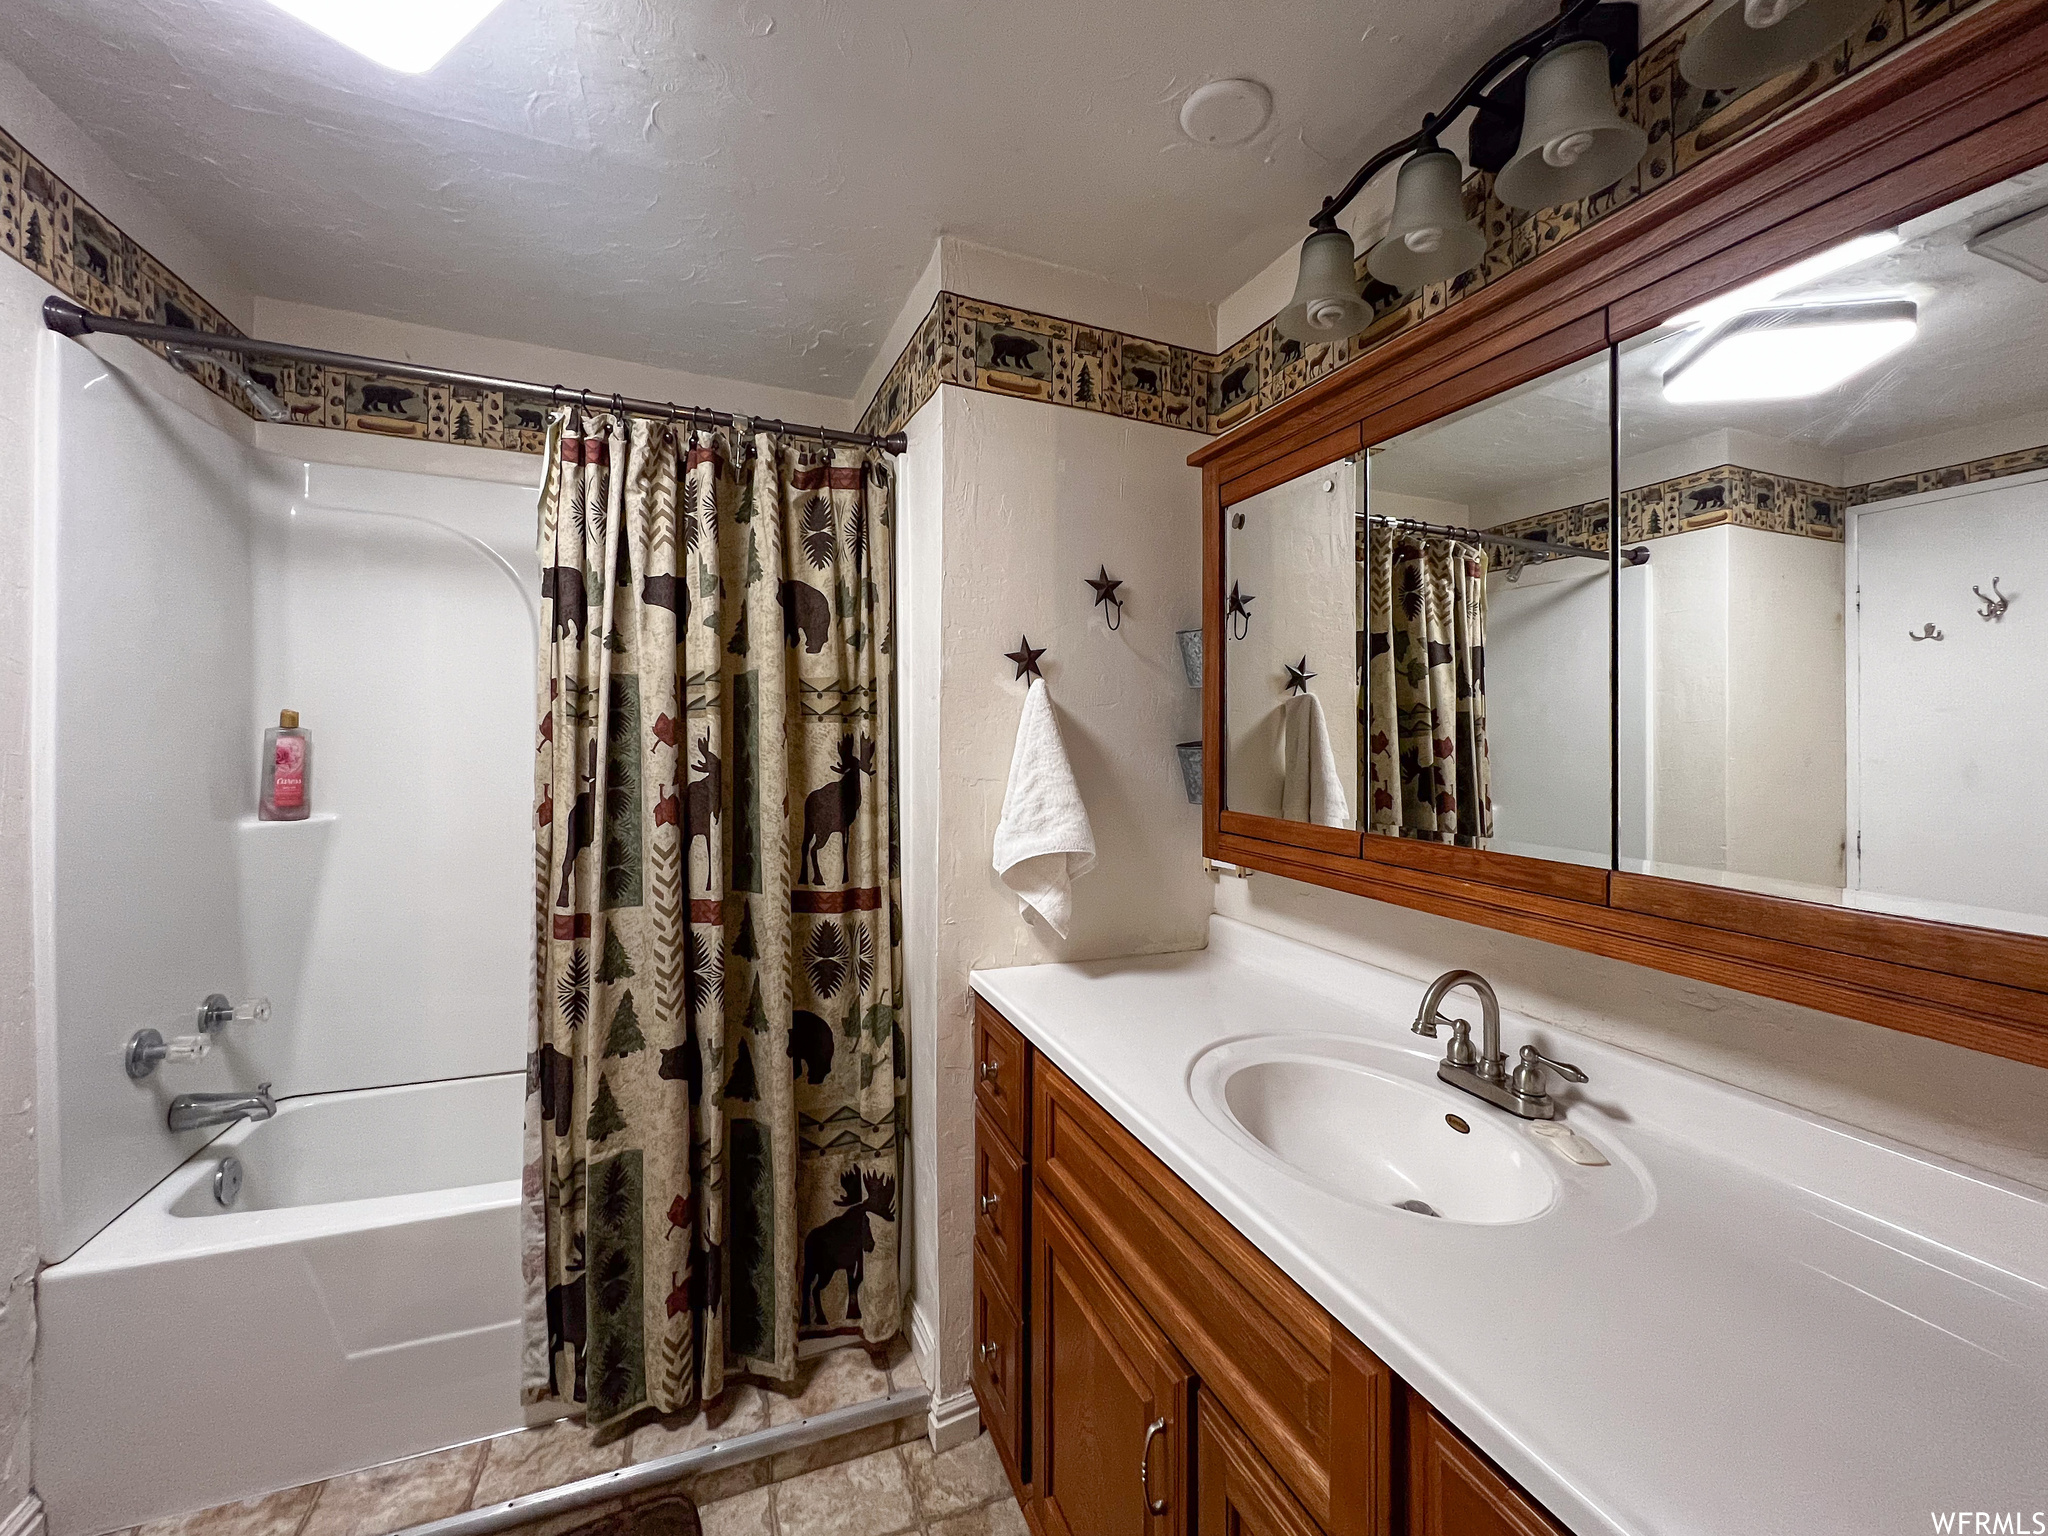 Bathroom with shower / tub combo, tile floors, and vanity with extensive cabinet space